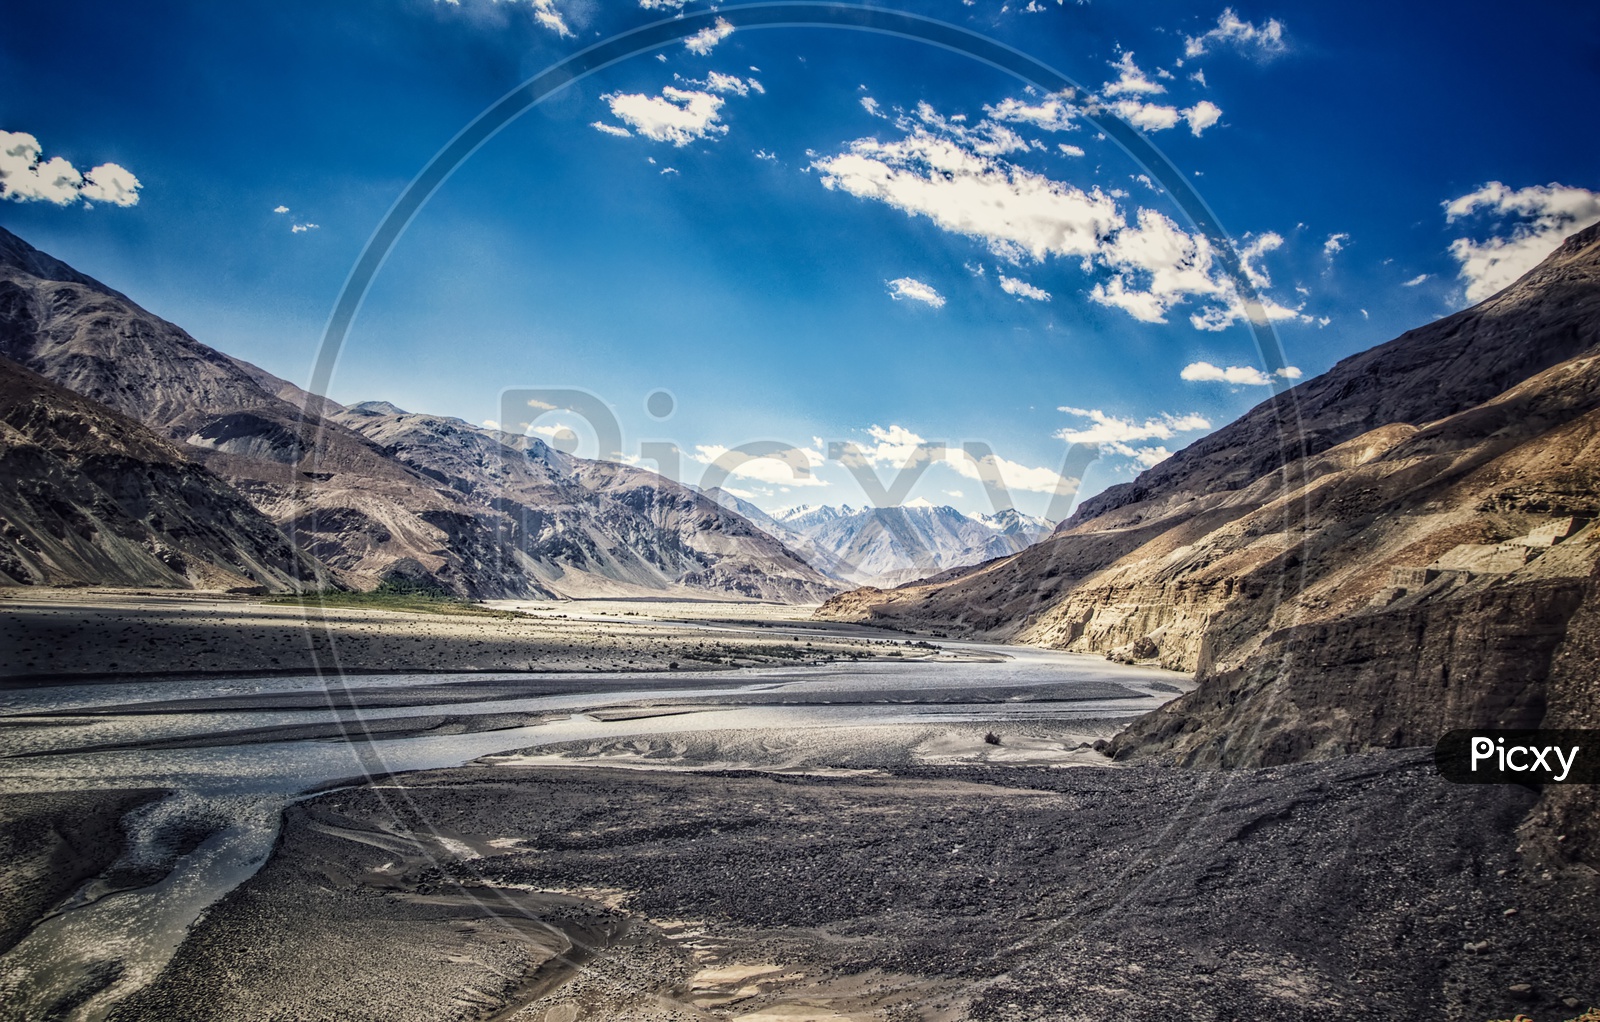 Landscape Photo Ladakh, Kashmir Featuring Blue Skies Mountains Rivers And Road With Shadows